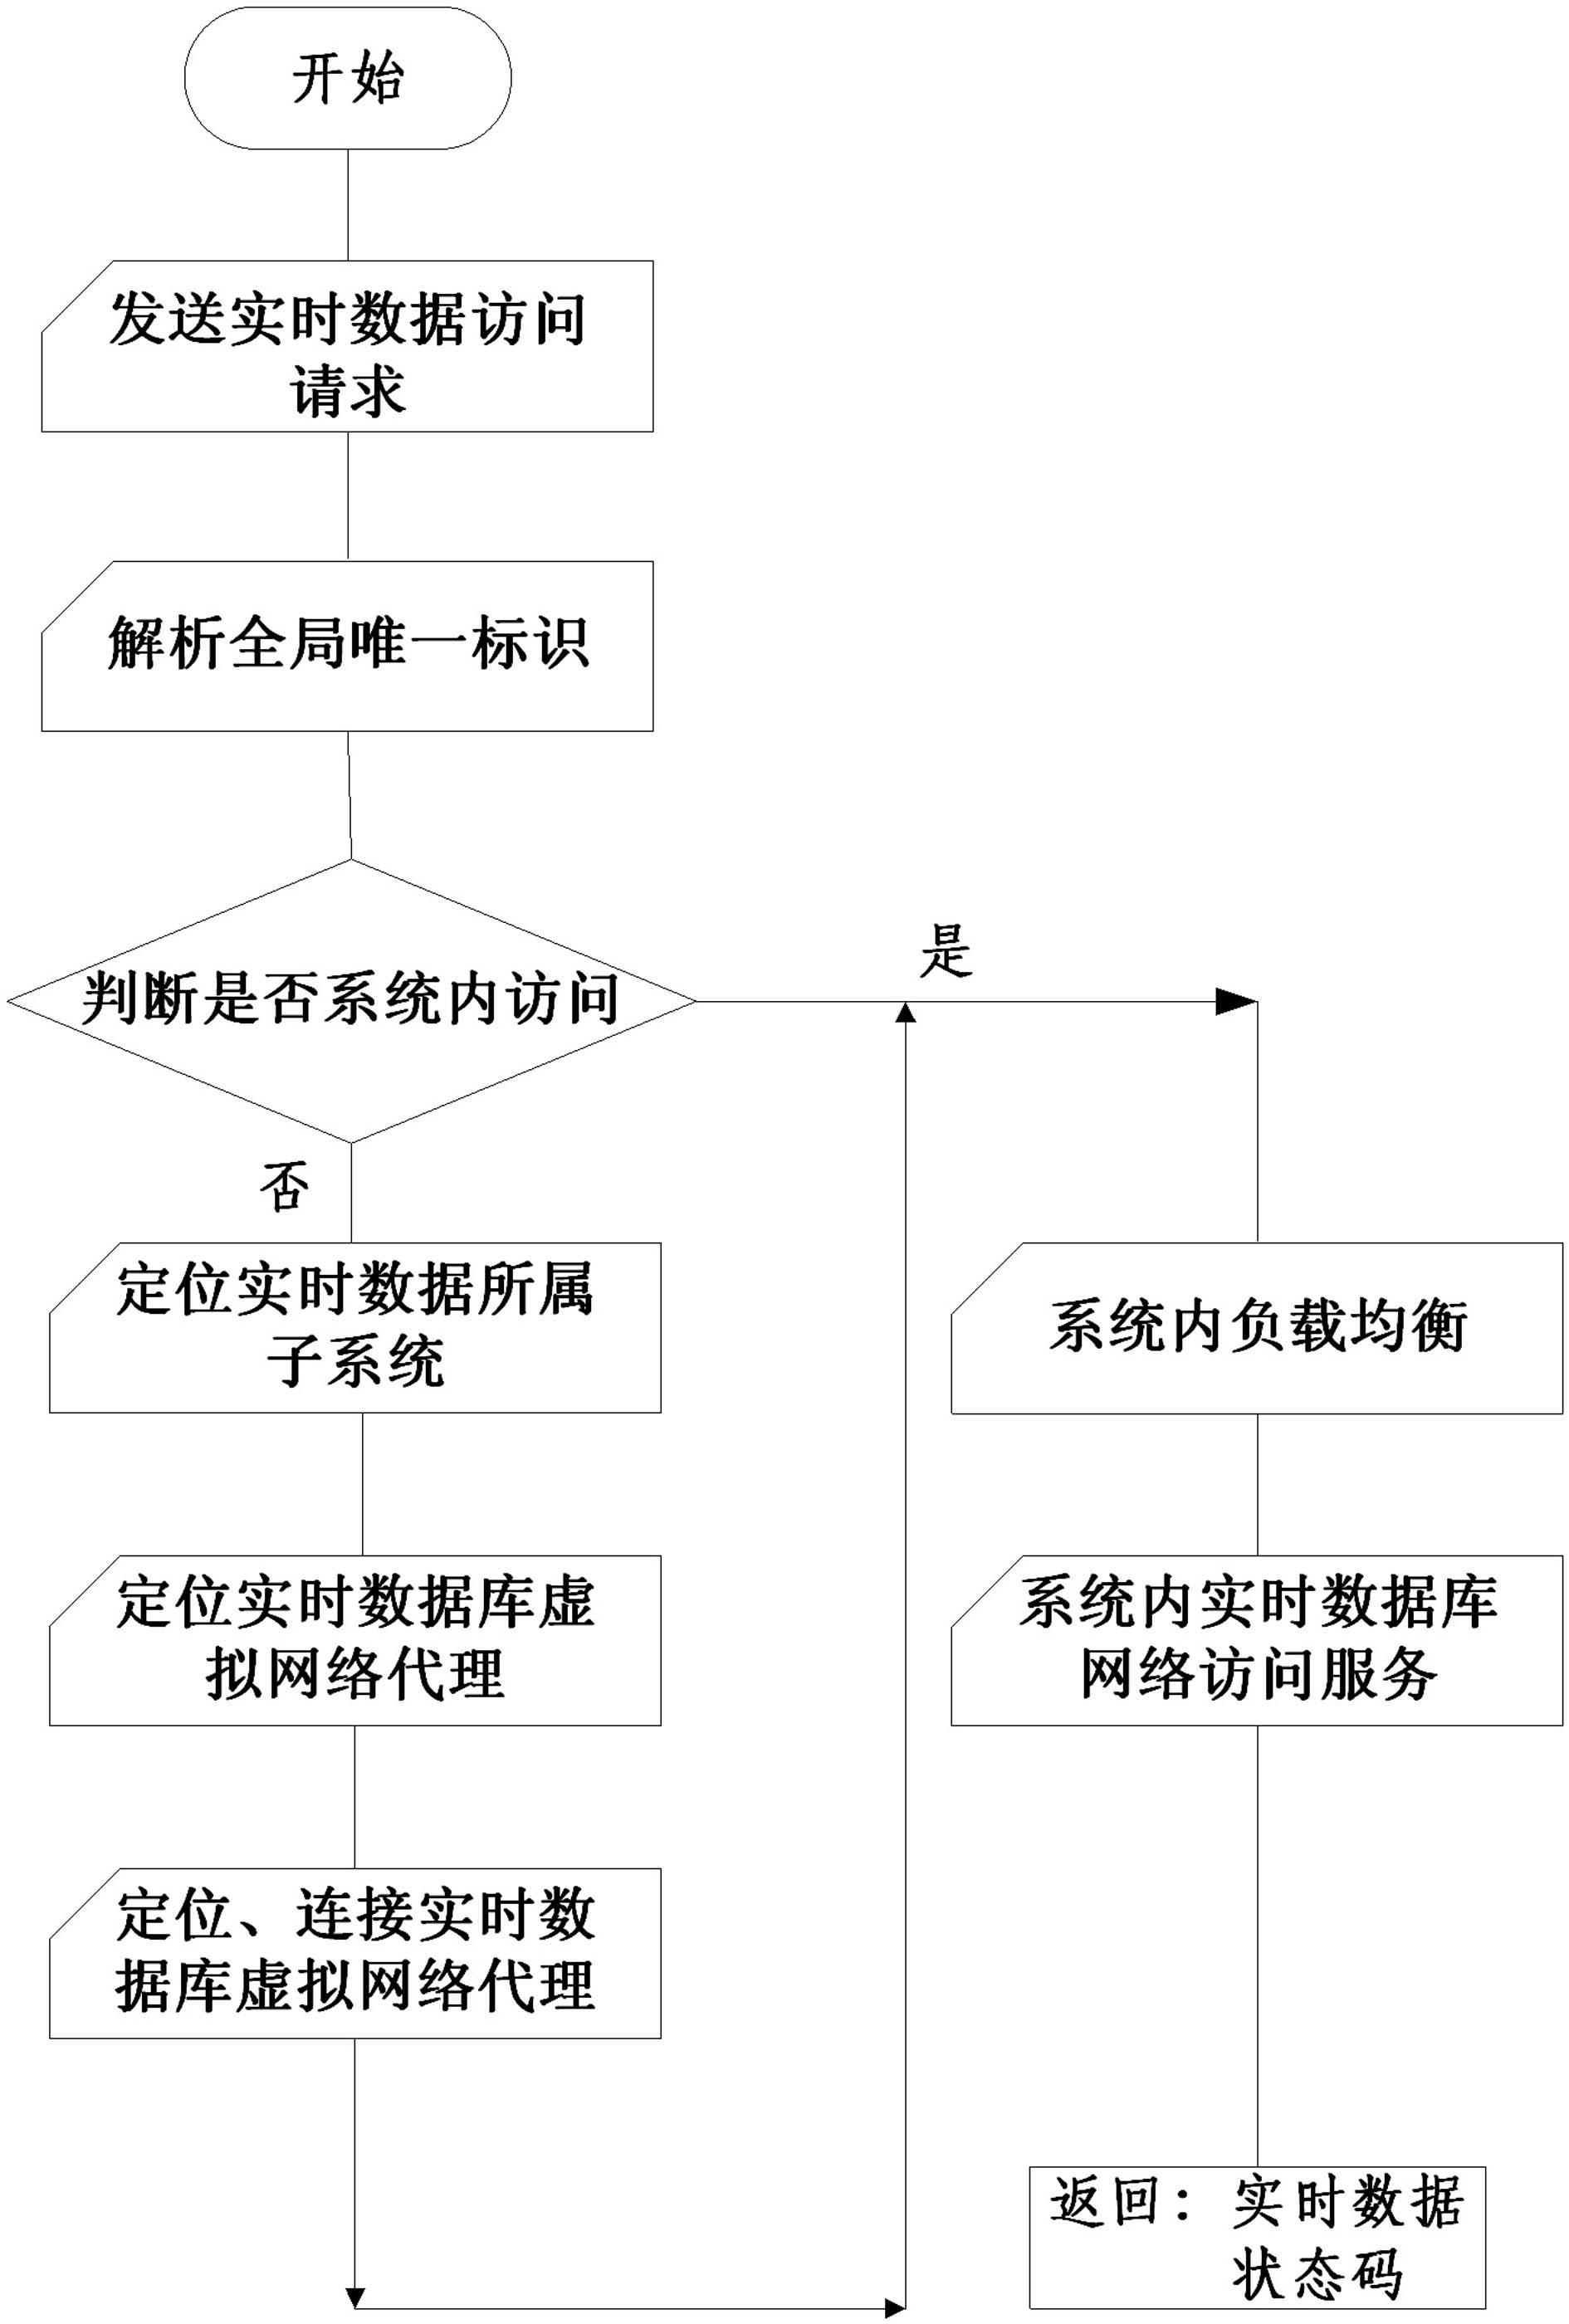 Large-grid distributed real-time database system and data management method thereof